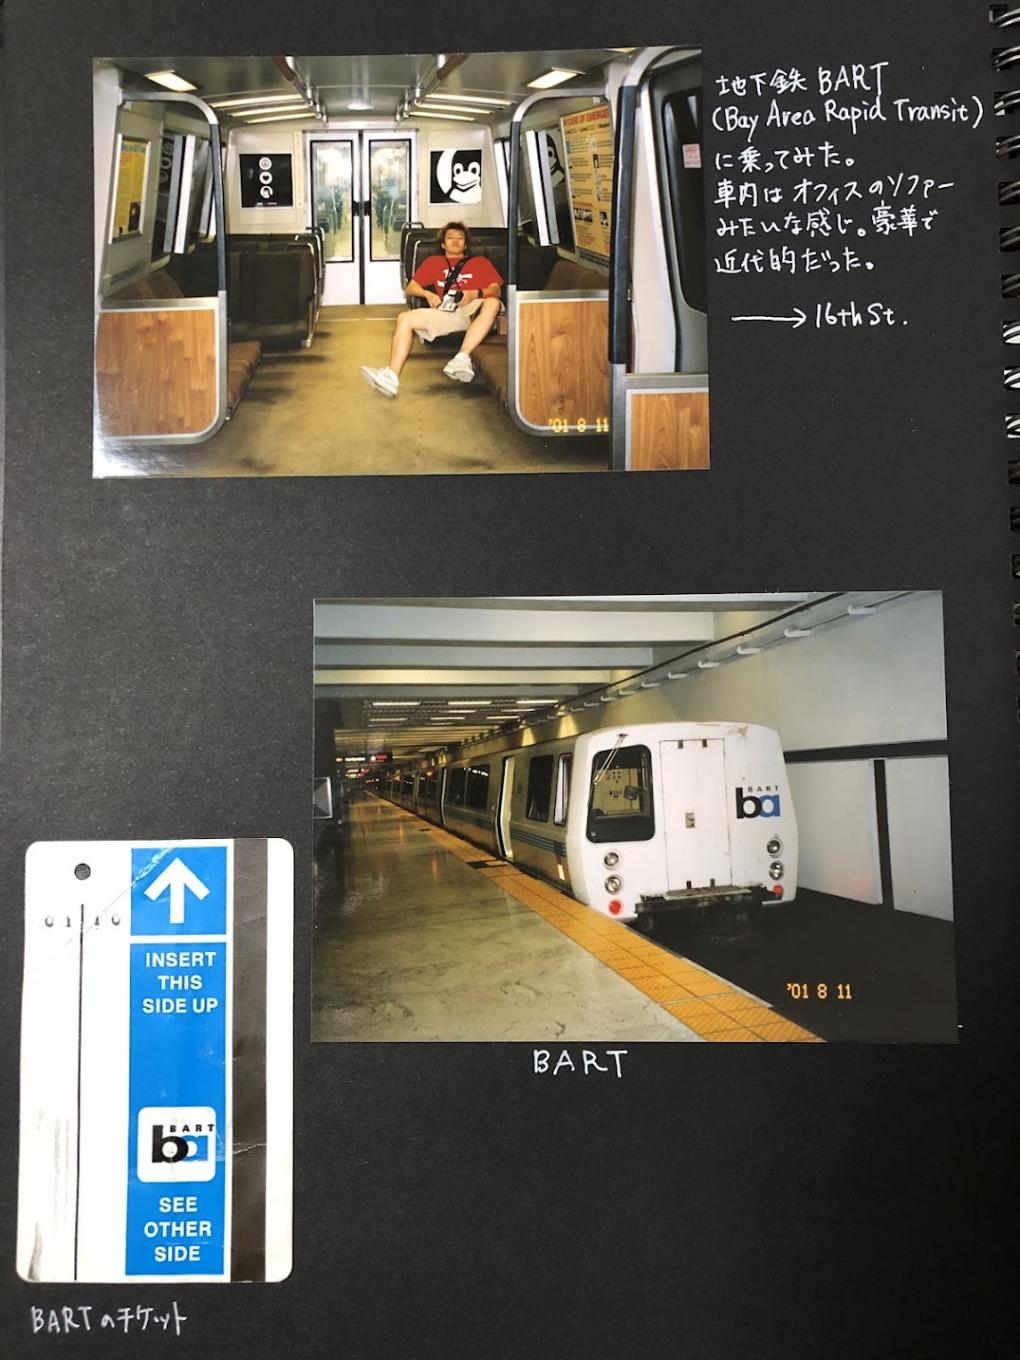 An image of a Bay Area Rapid Transit (BART) train car and station, featuring a scrapbook page with a photo of a person sitting inside a BART train, and an adjacent photo showing a BART train at the station, accompanied by a BART ticket with instructions in English and Japanese.